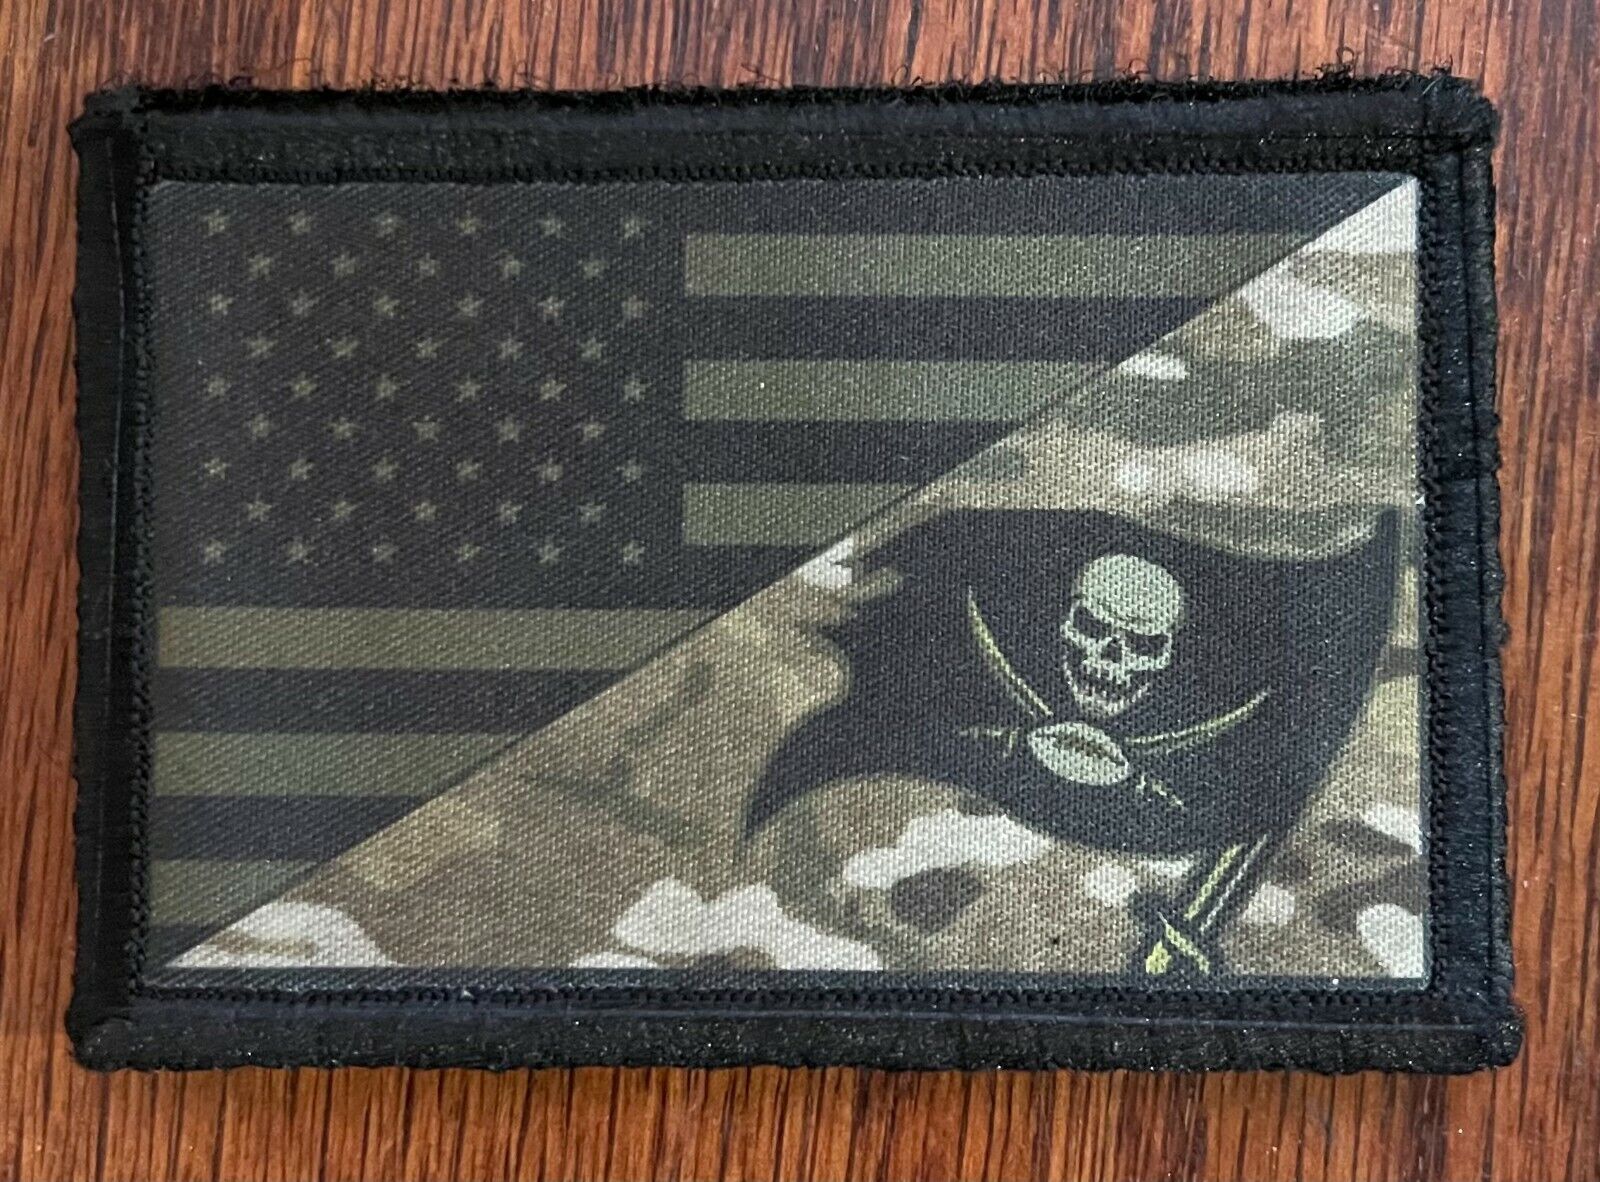  Subdued Multicam Tampa Bay Buccaneers / USA Flag Morale Patch Tactical Military